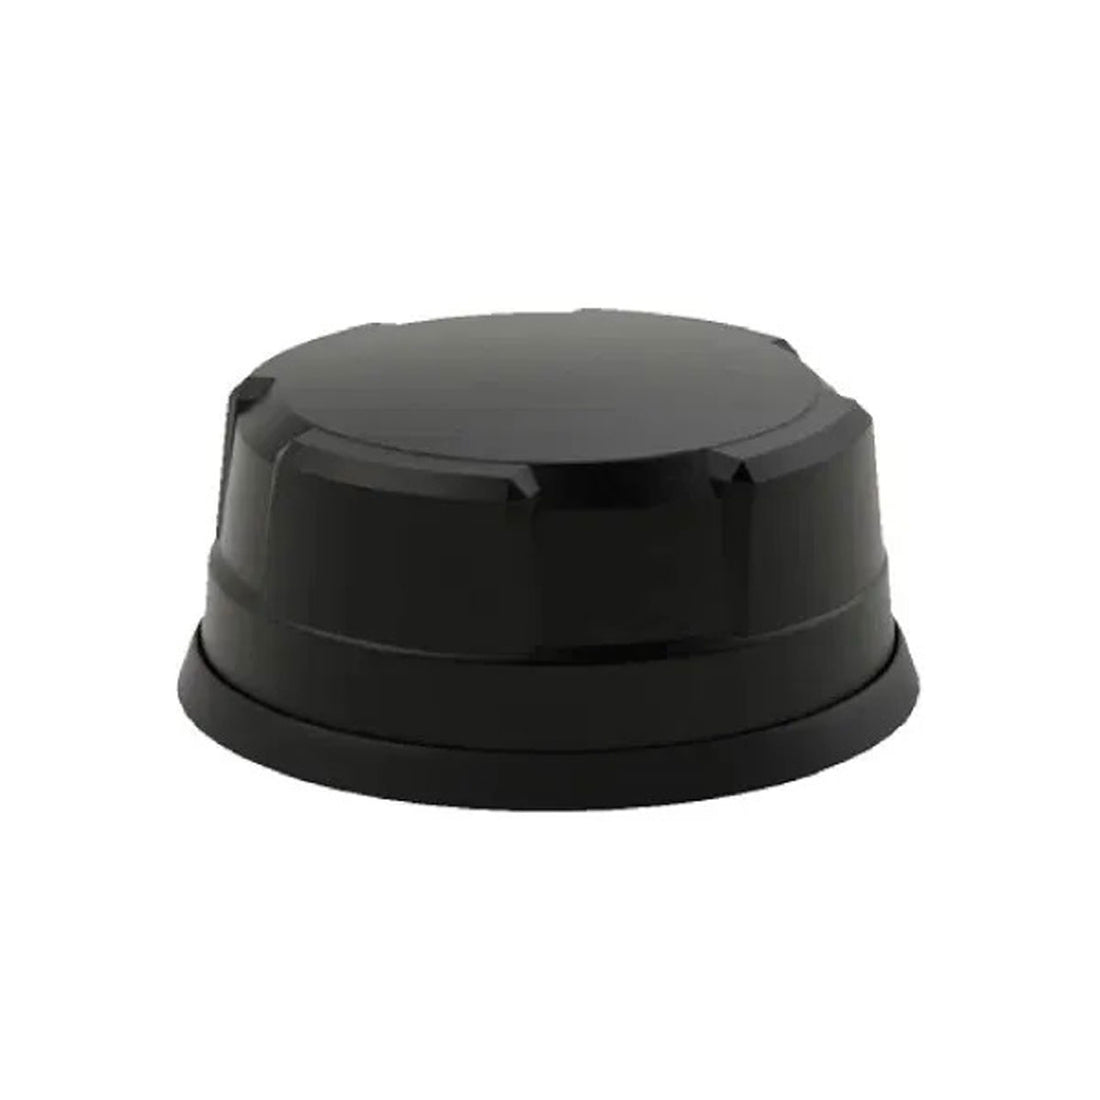 6001399 - 9in1 Dome Antenna - 4x5G/LTE, GNSS, 4xWi-Fi 2.4/5GHz, Bolt Mount, 5m, Fakra, Black